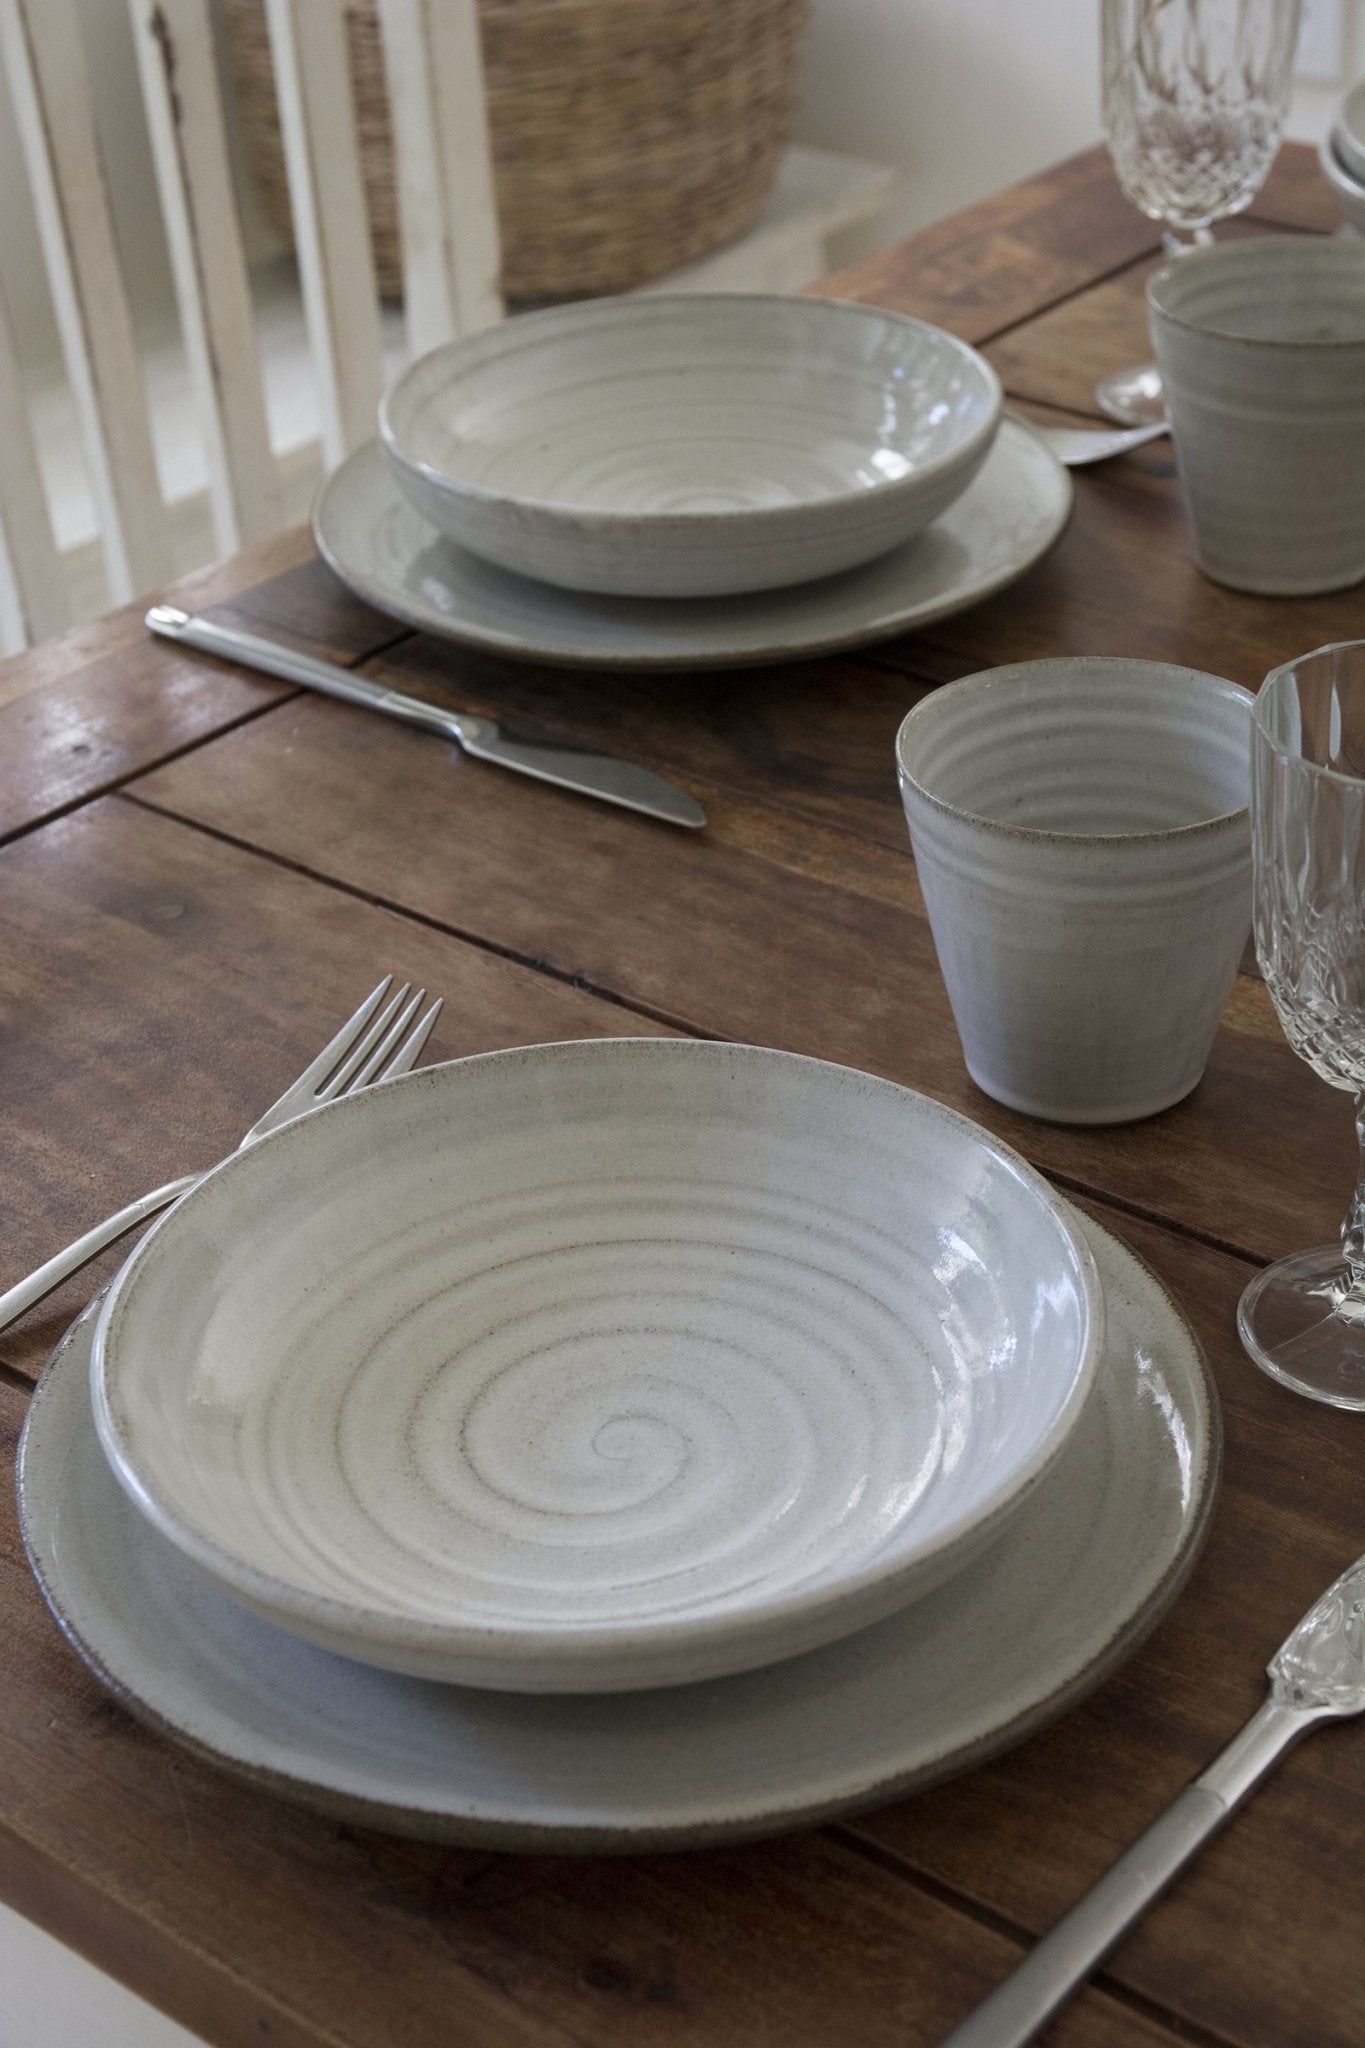 Pottery Dinnerware, 1 Place Setting, Main Course Plate and a Pasta Bowl